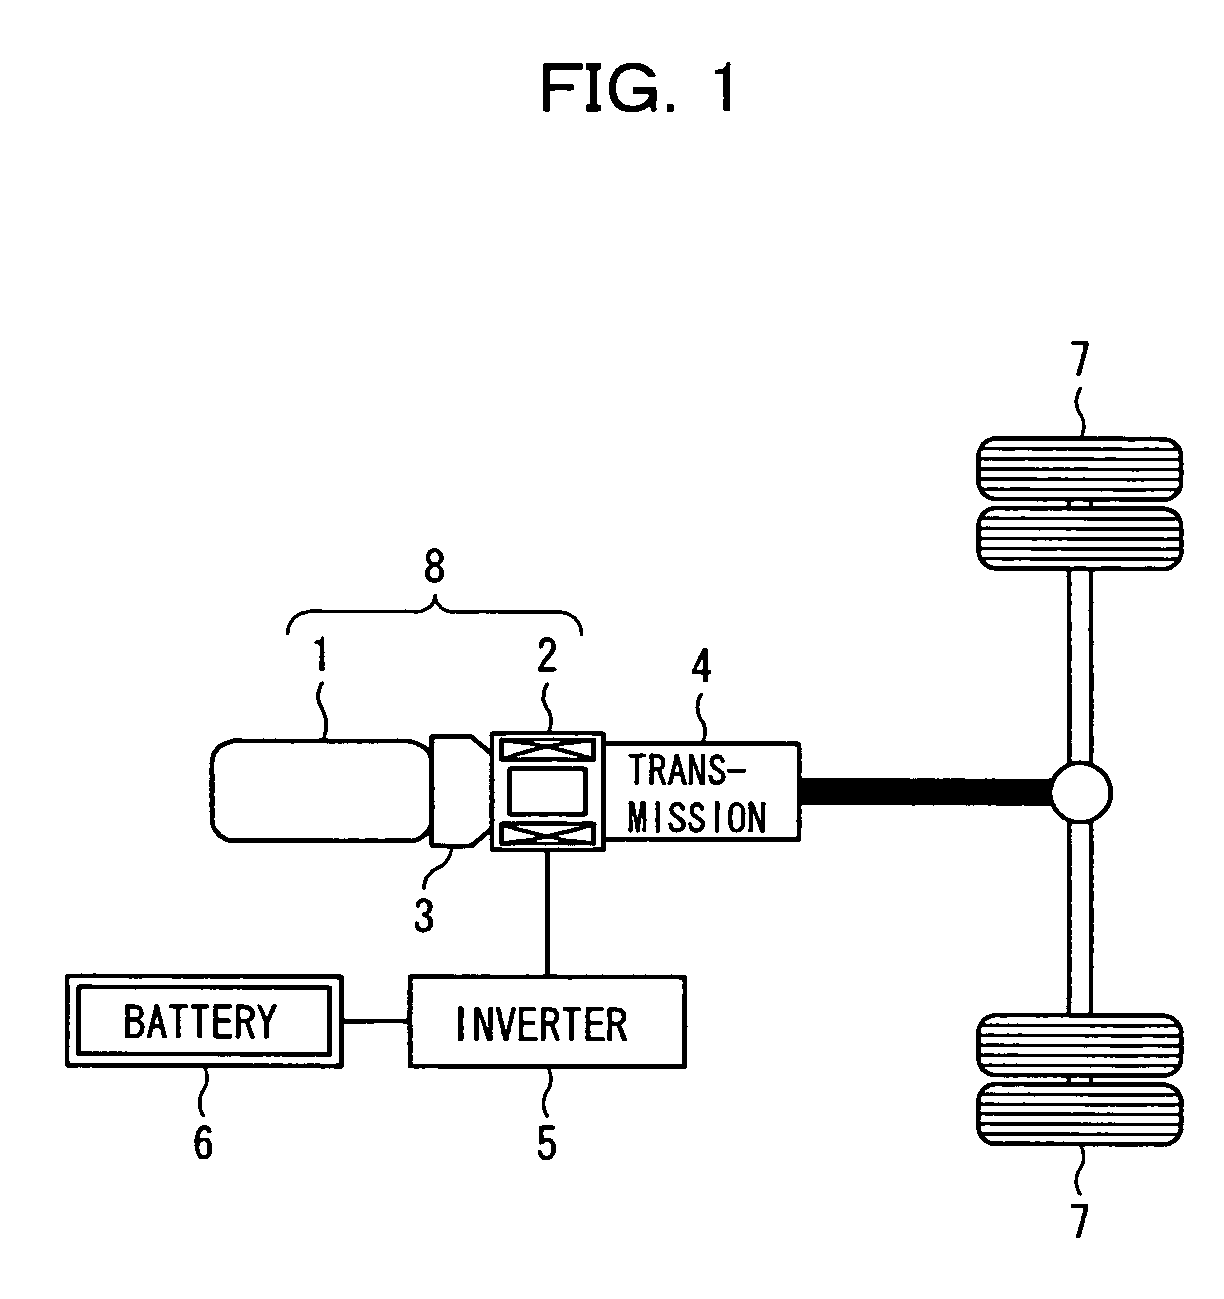 Motor control apparatus for a hybrid vehicle